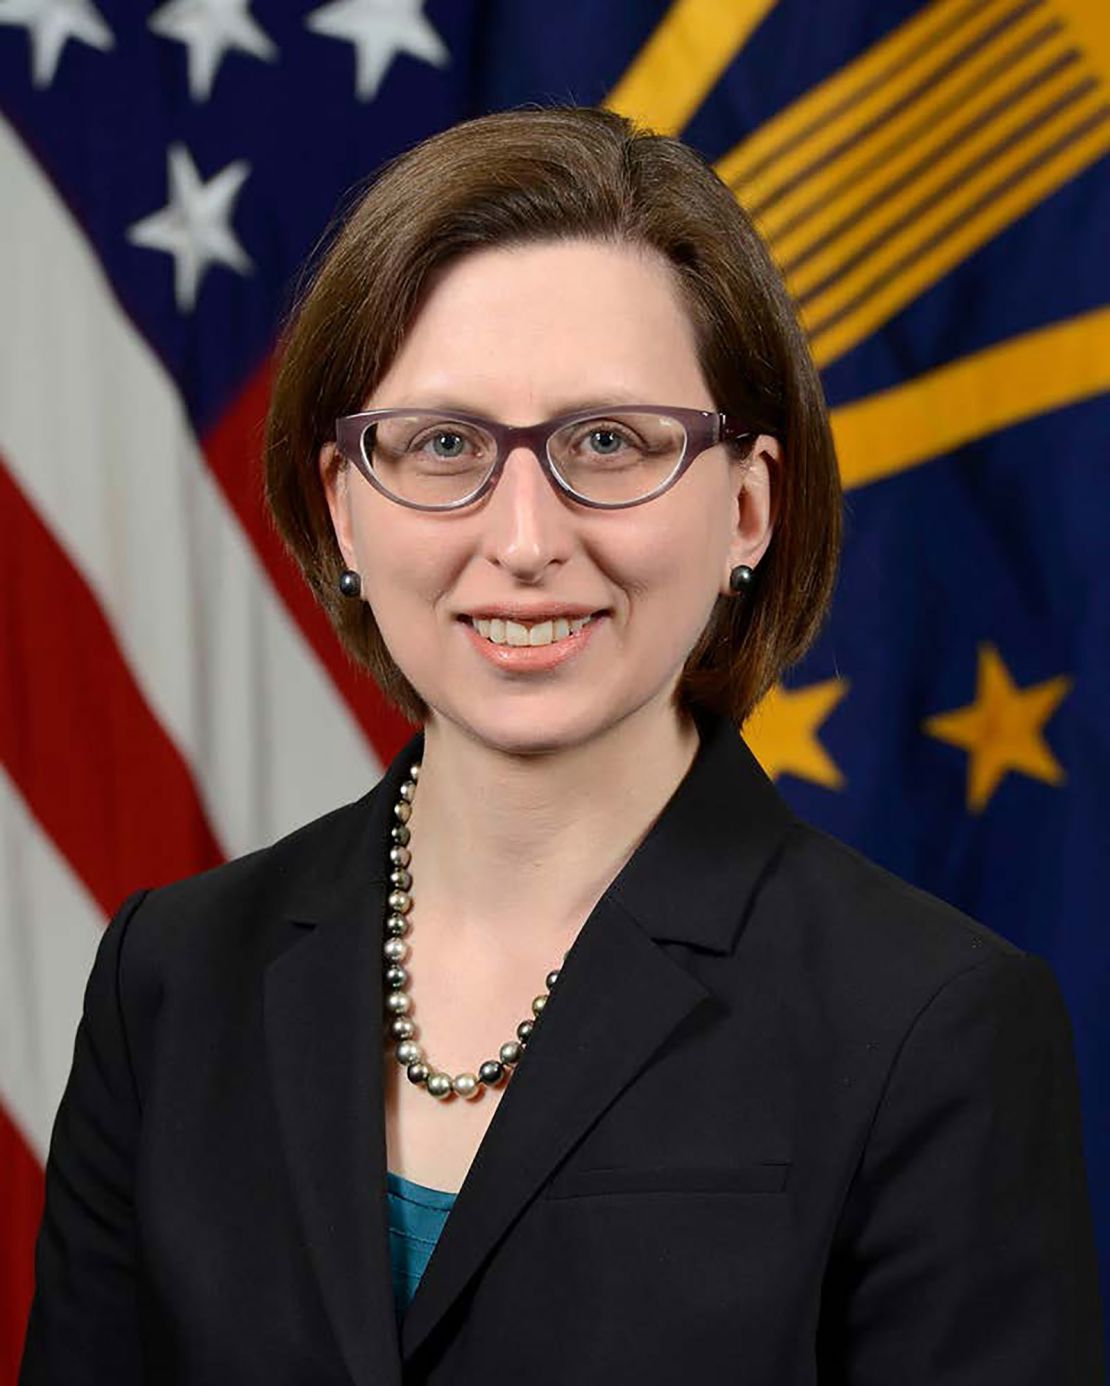 In this image provided by the Department of Defense, Deputy Assistant Secretary of Defense Laura K. Cooper is photographed in Washington.